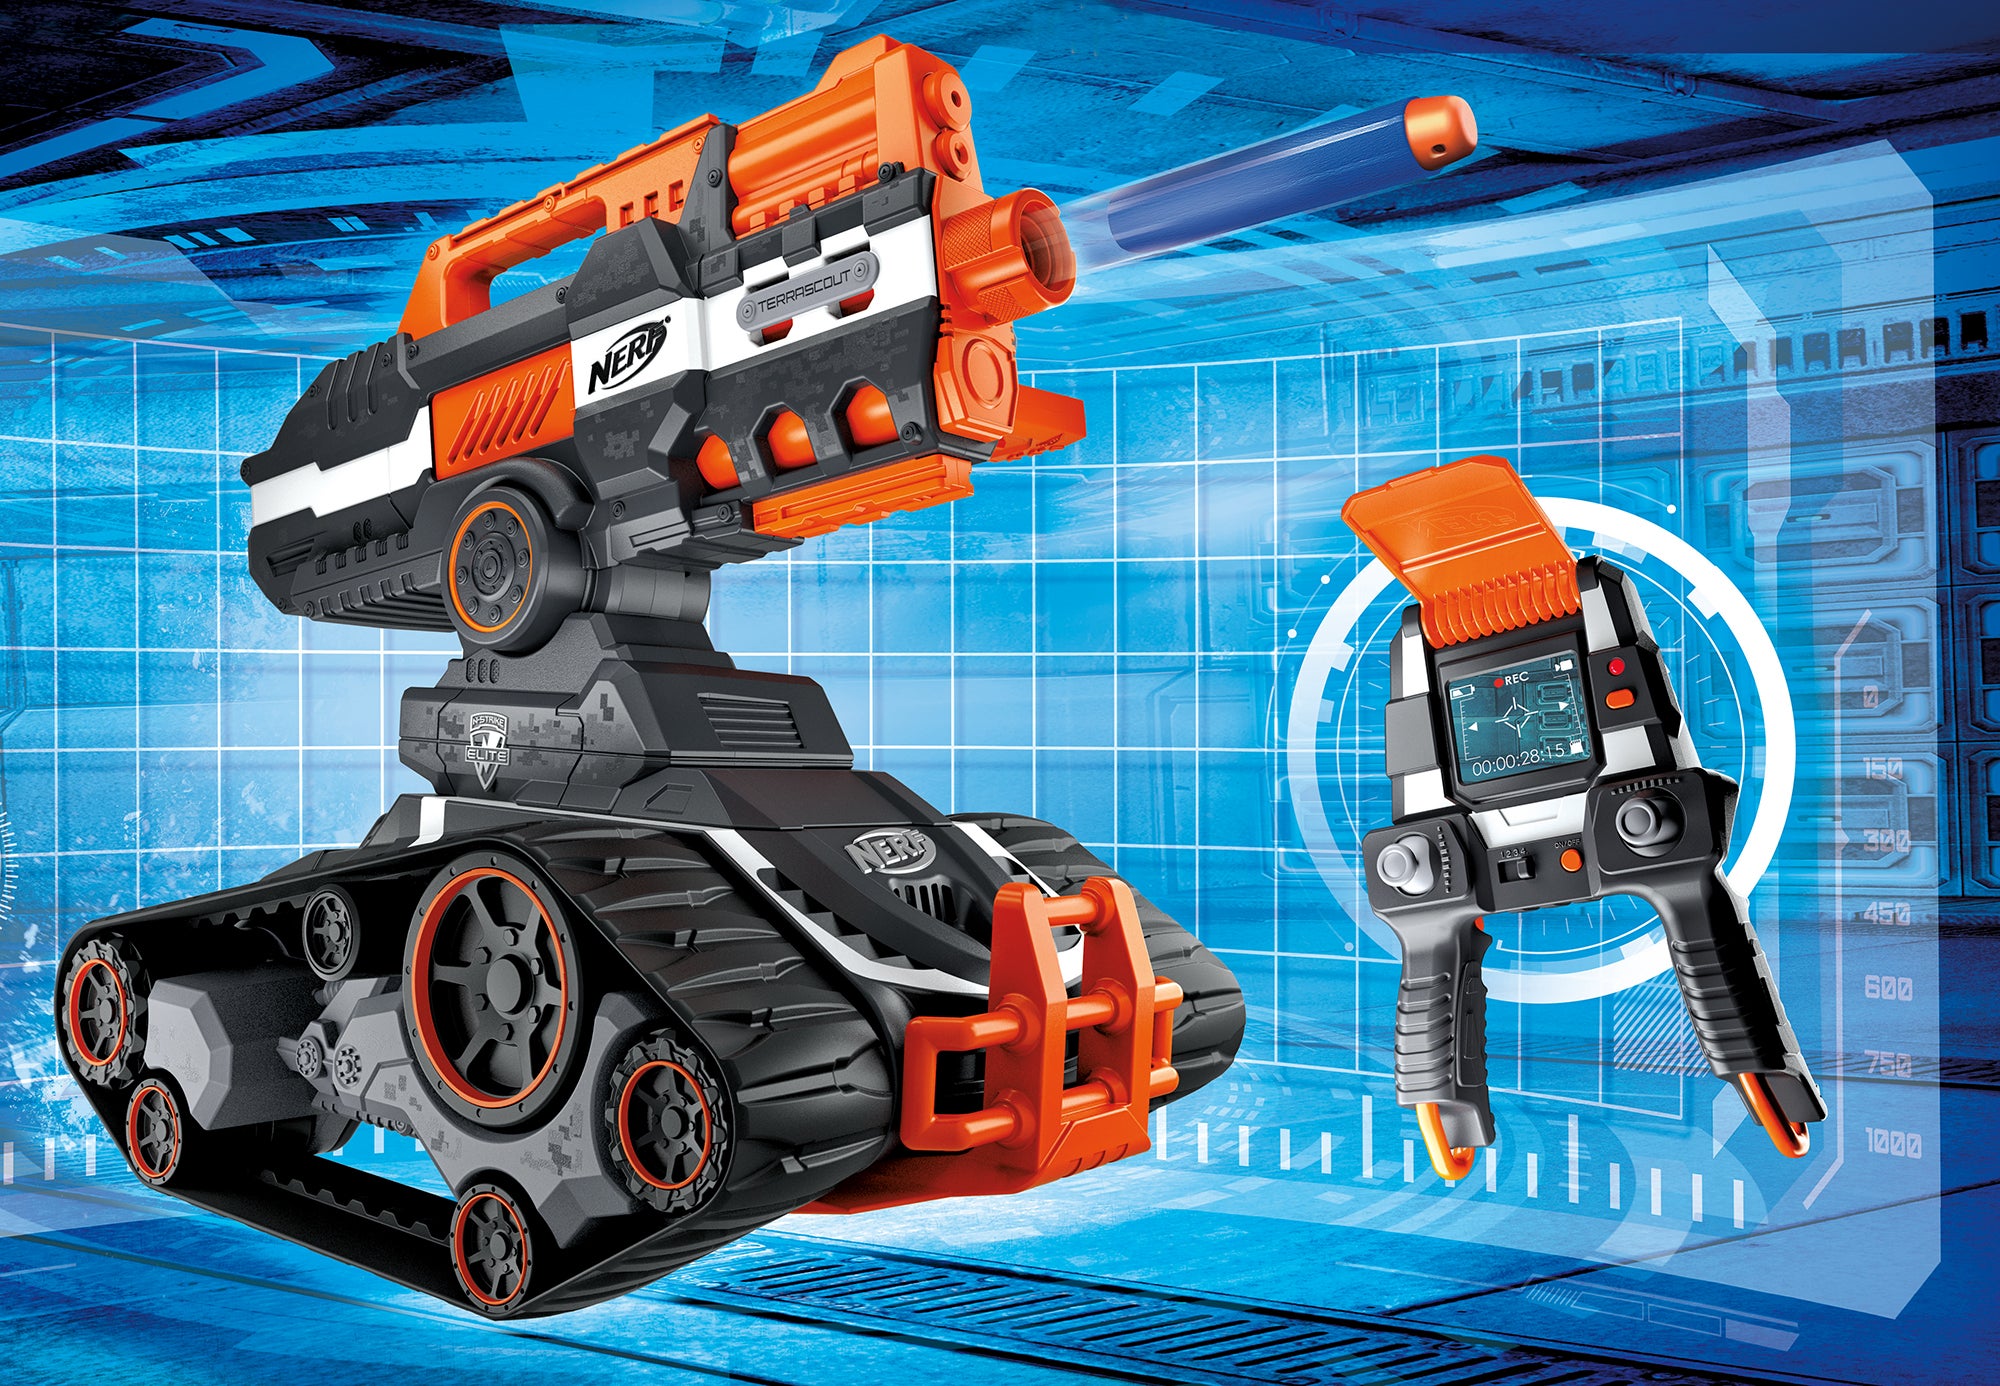 Nerf's New Dart-Blasting RC Battle Tank Is Straight Out Of Terminator